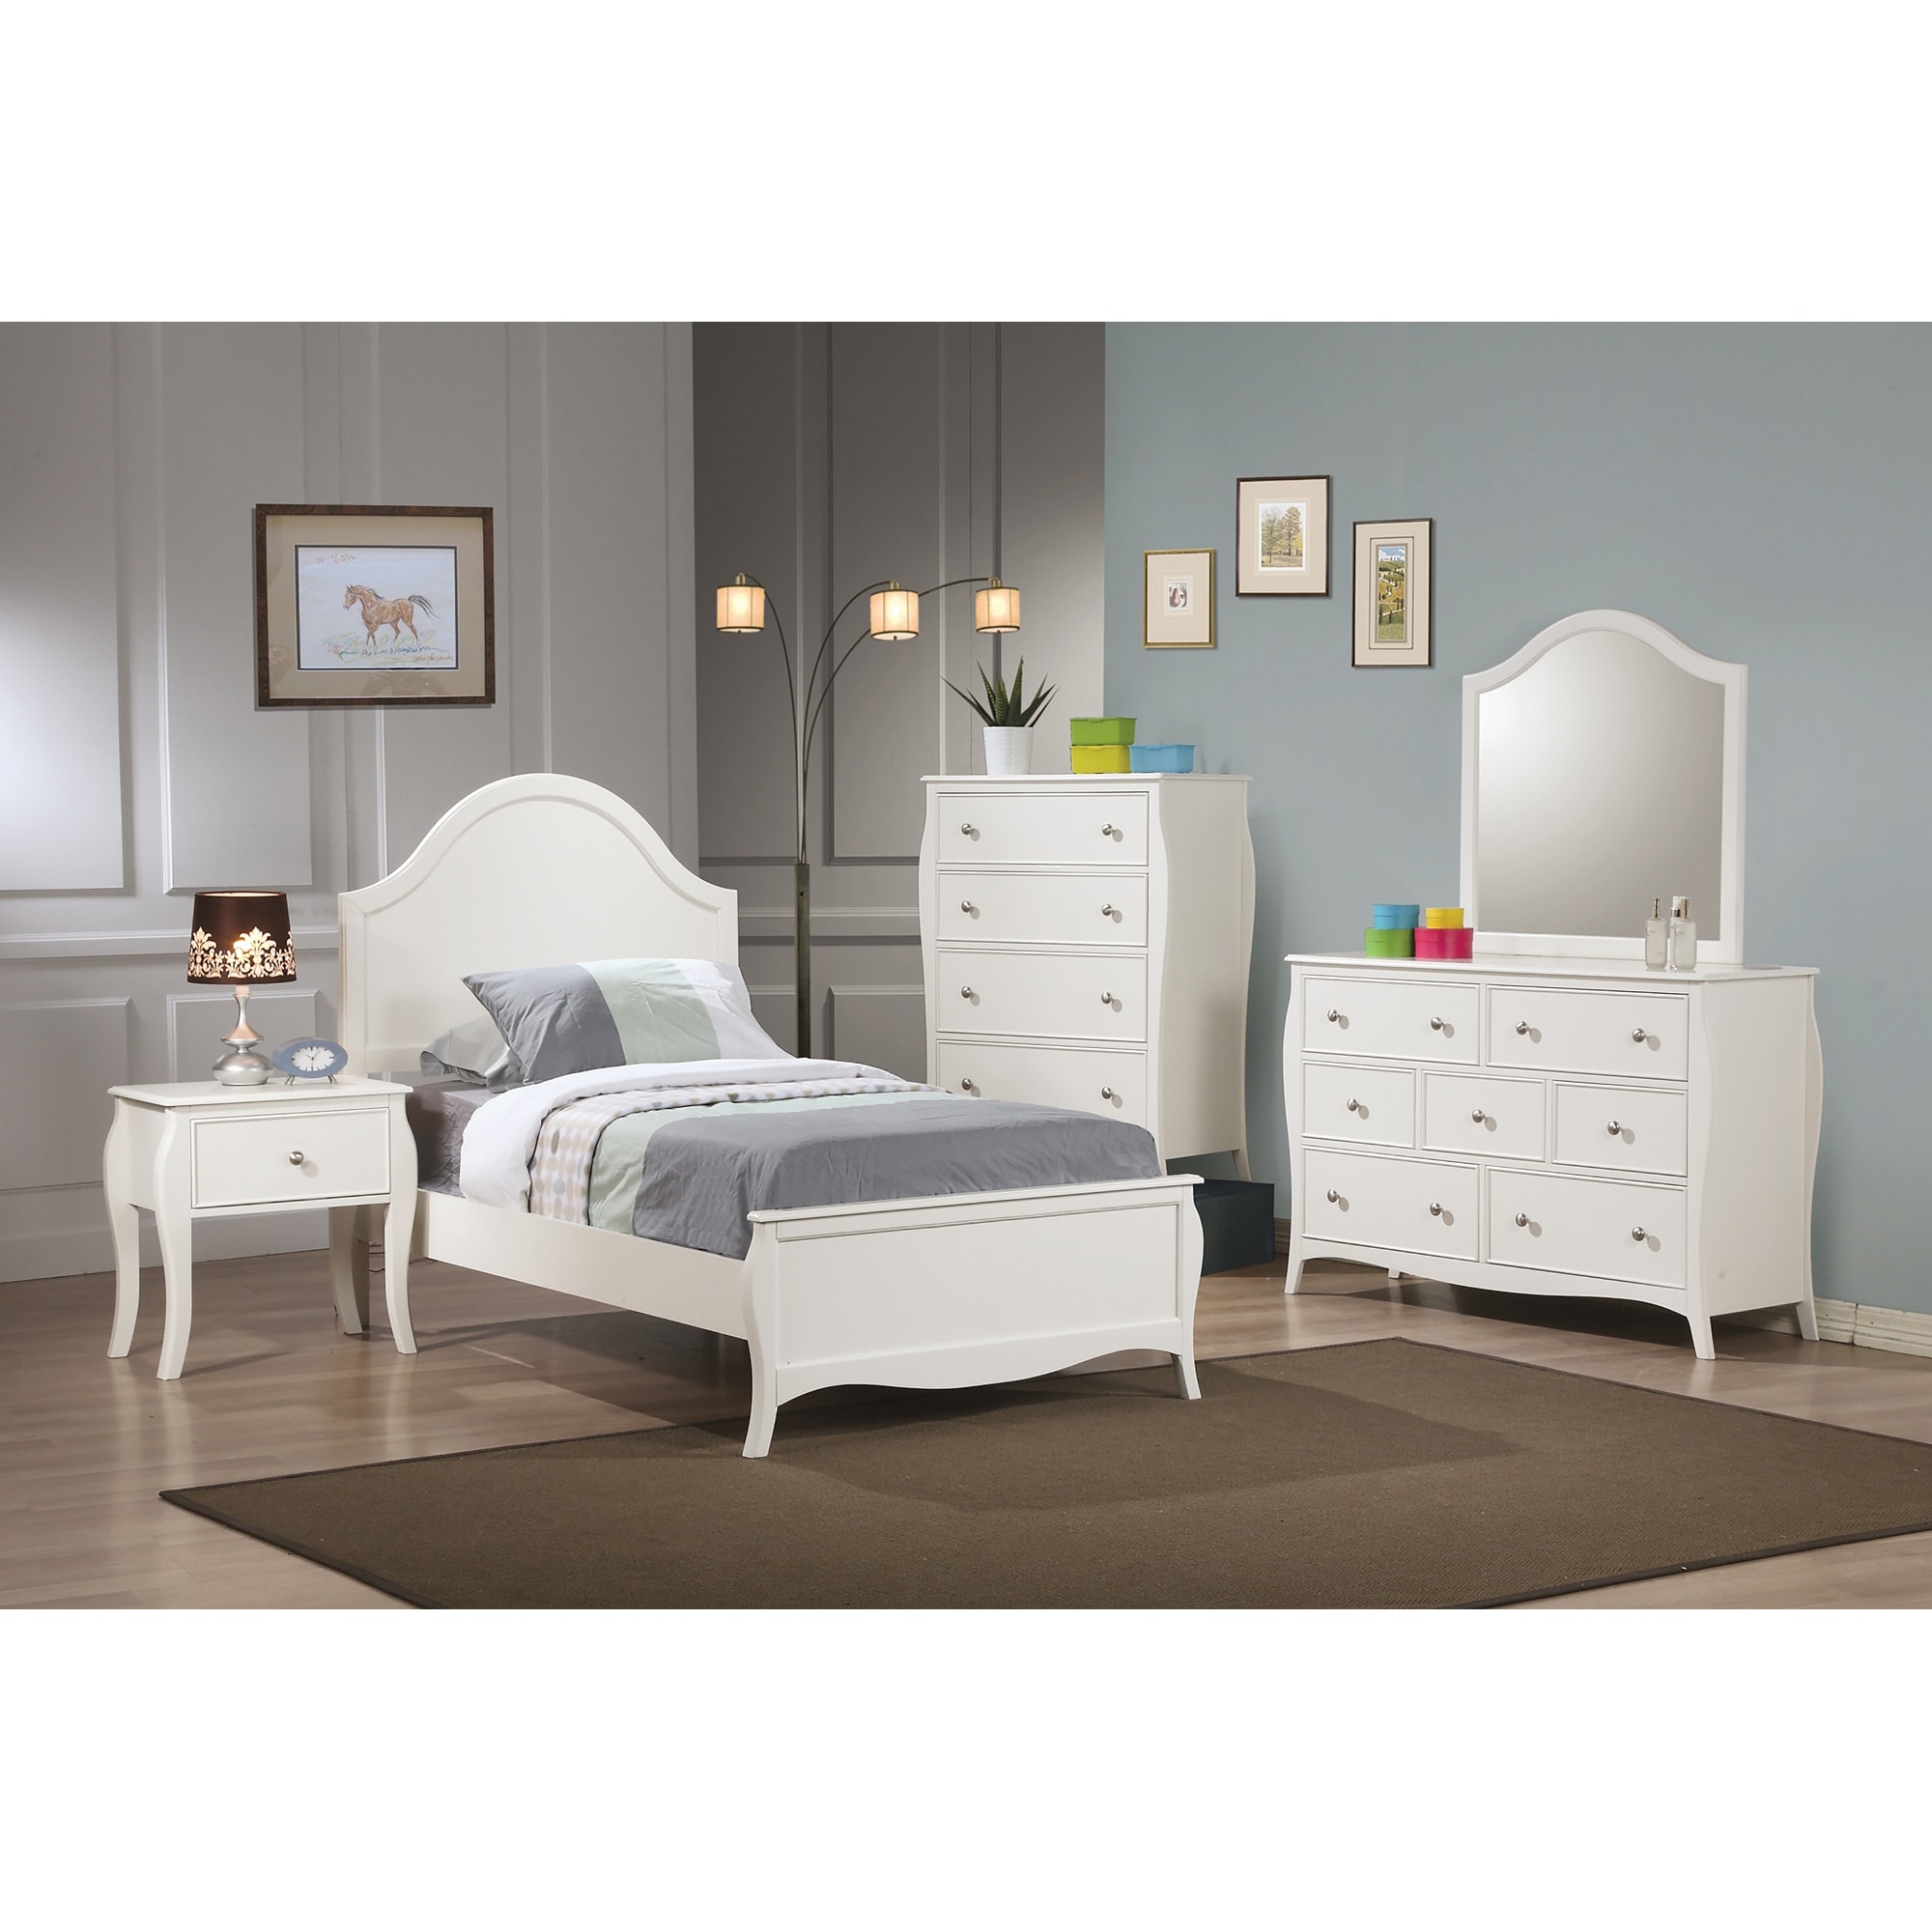 Chloe French Country White Panel Bed